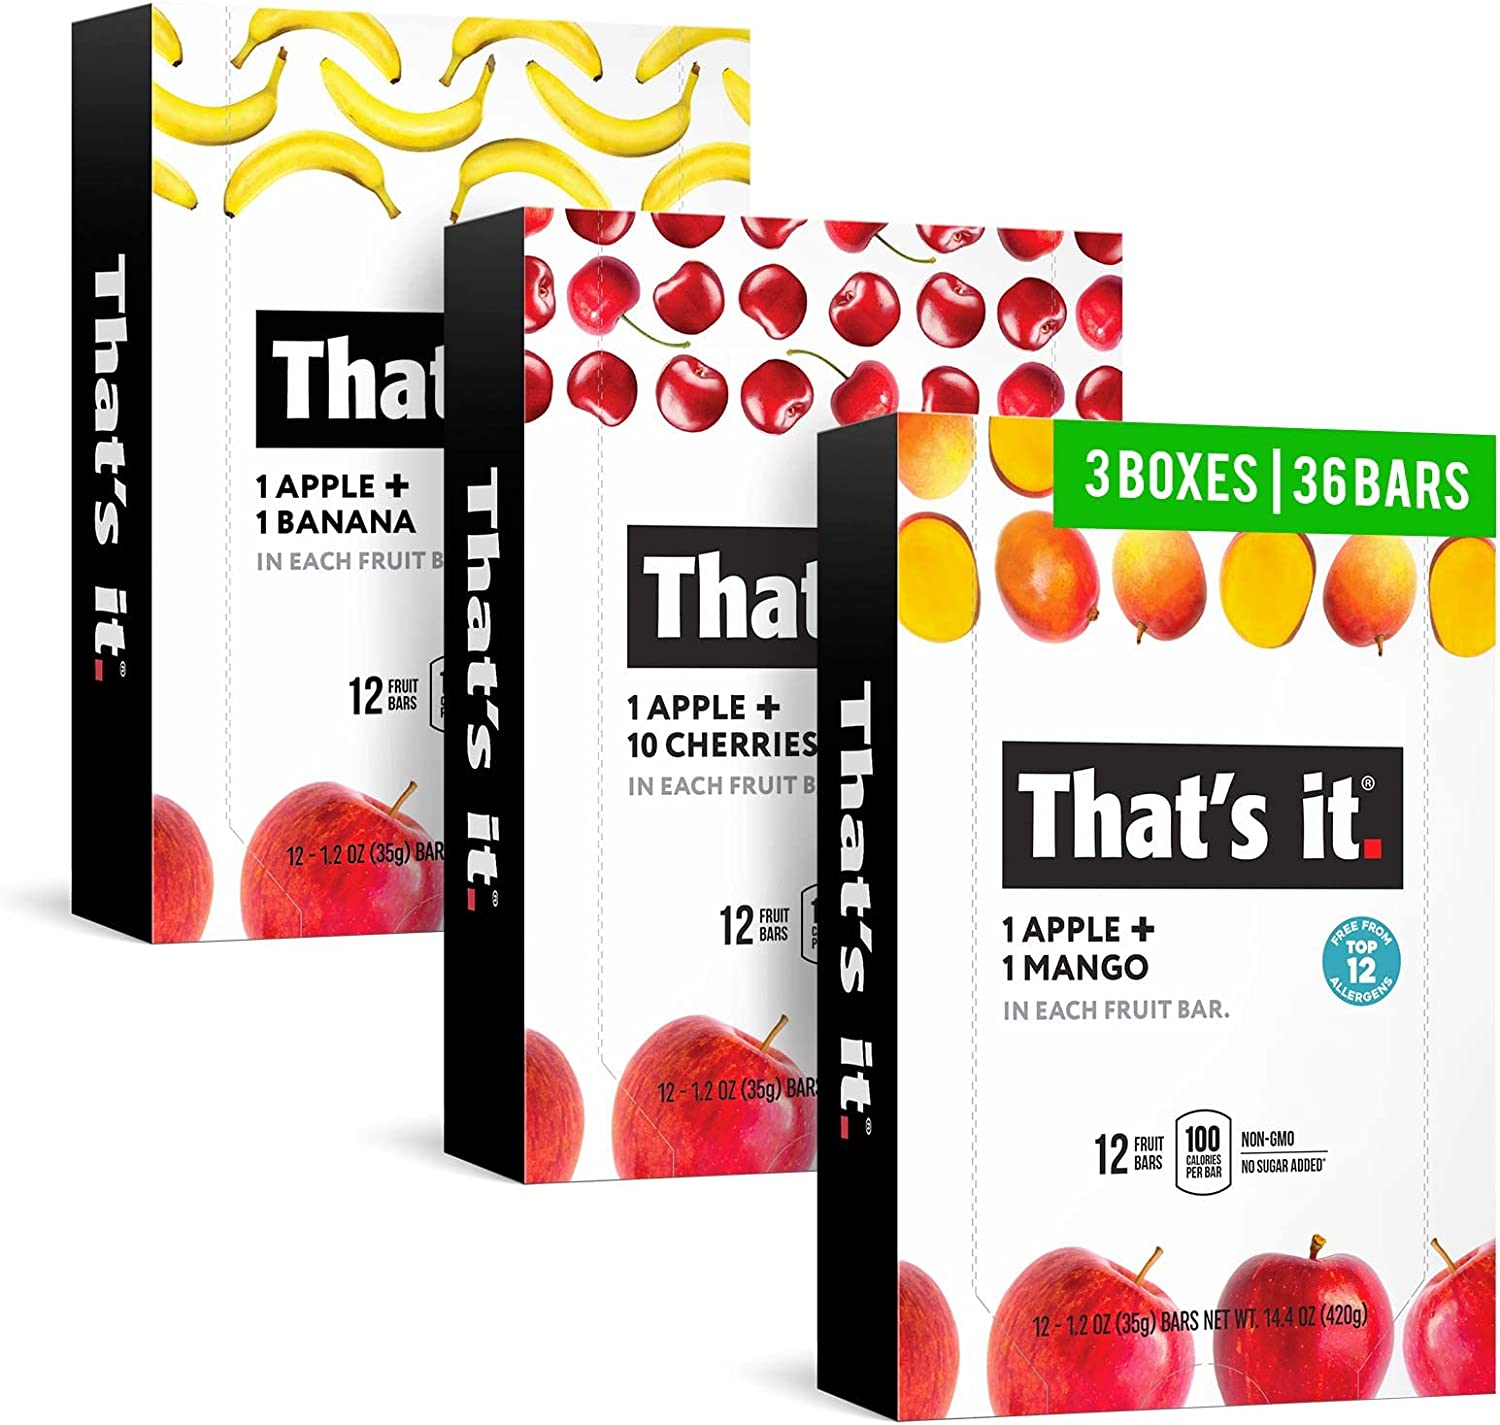 That’s it. Variety, 100% Natural Real Fruit Bar, High Fiber Vegan, Gluten Free Healthy Snack, Paleo for Children & Adults, Non GMO No Added Sugar, (Mango, Cherry, Banana) (36 Pack)